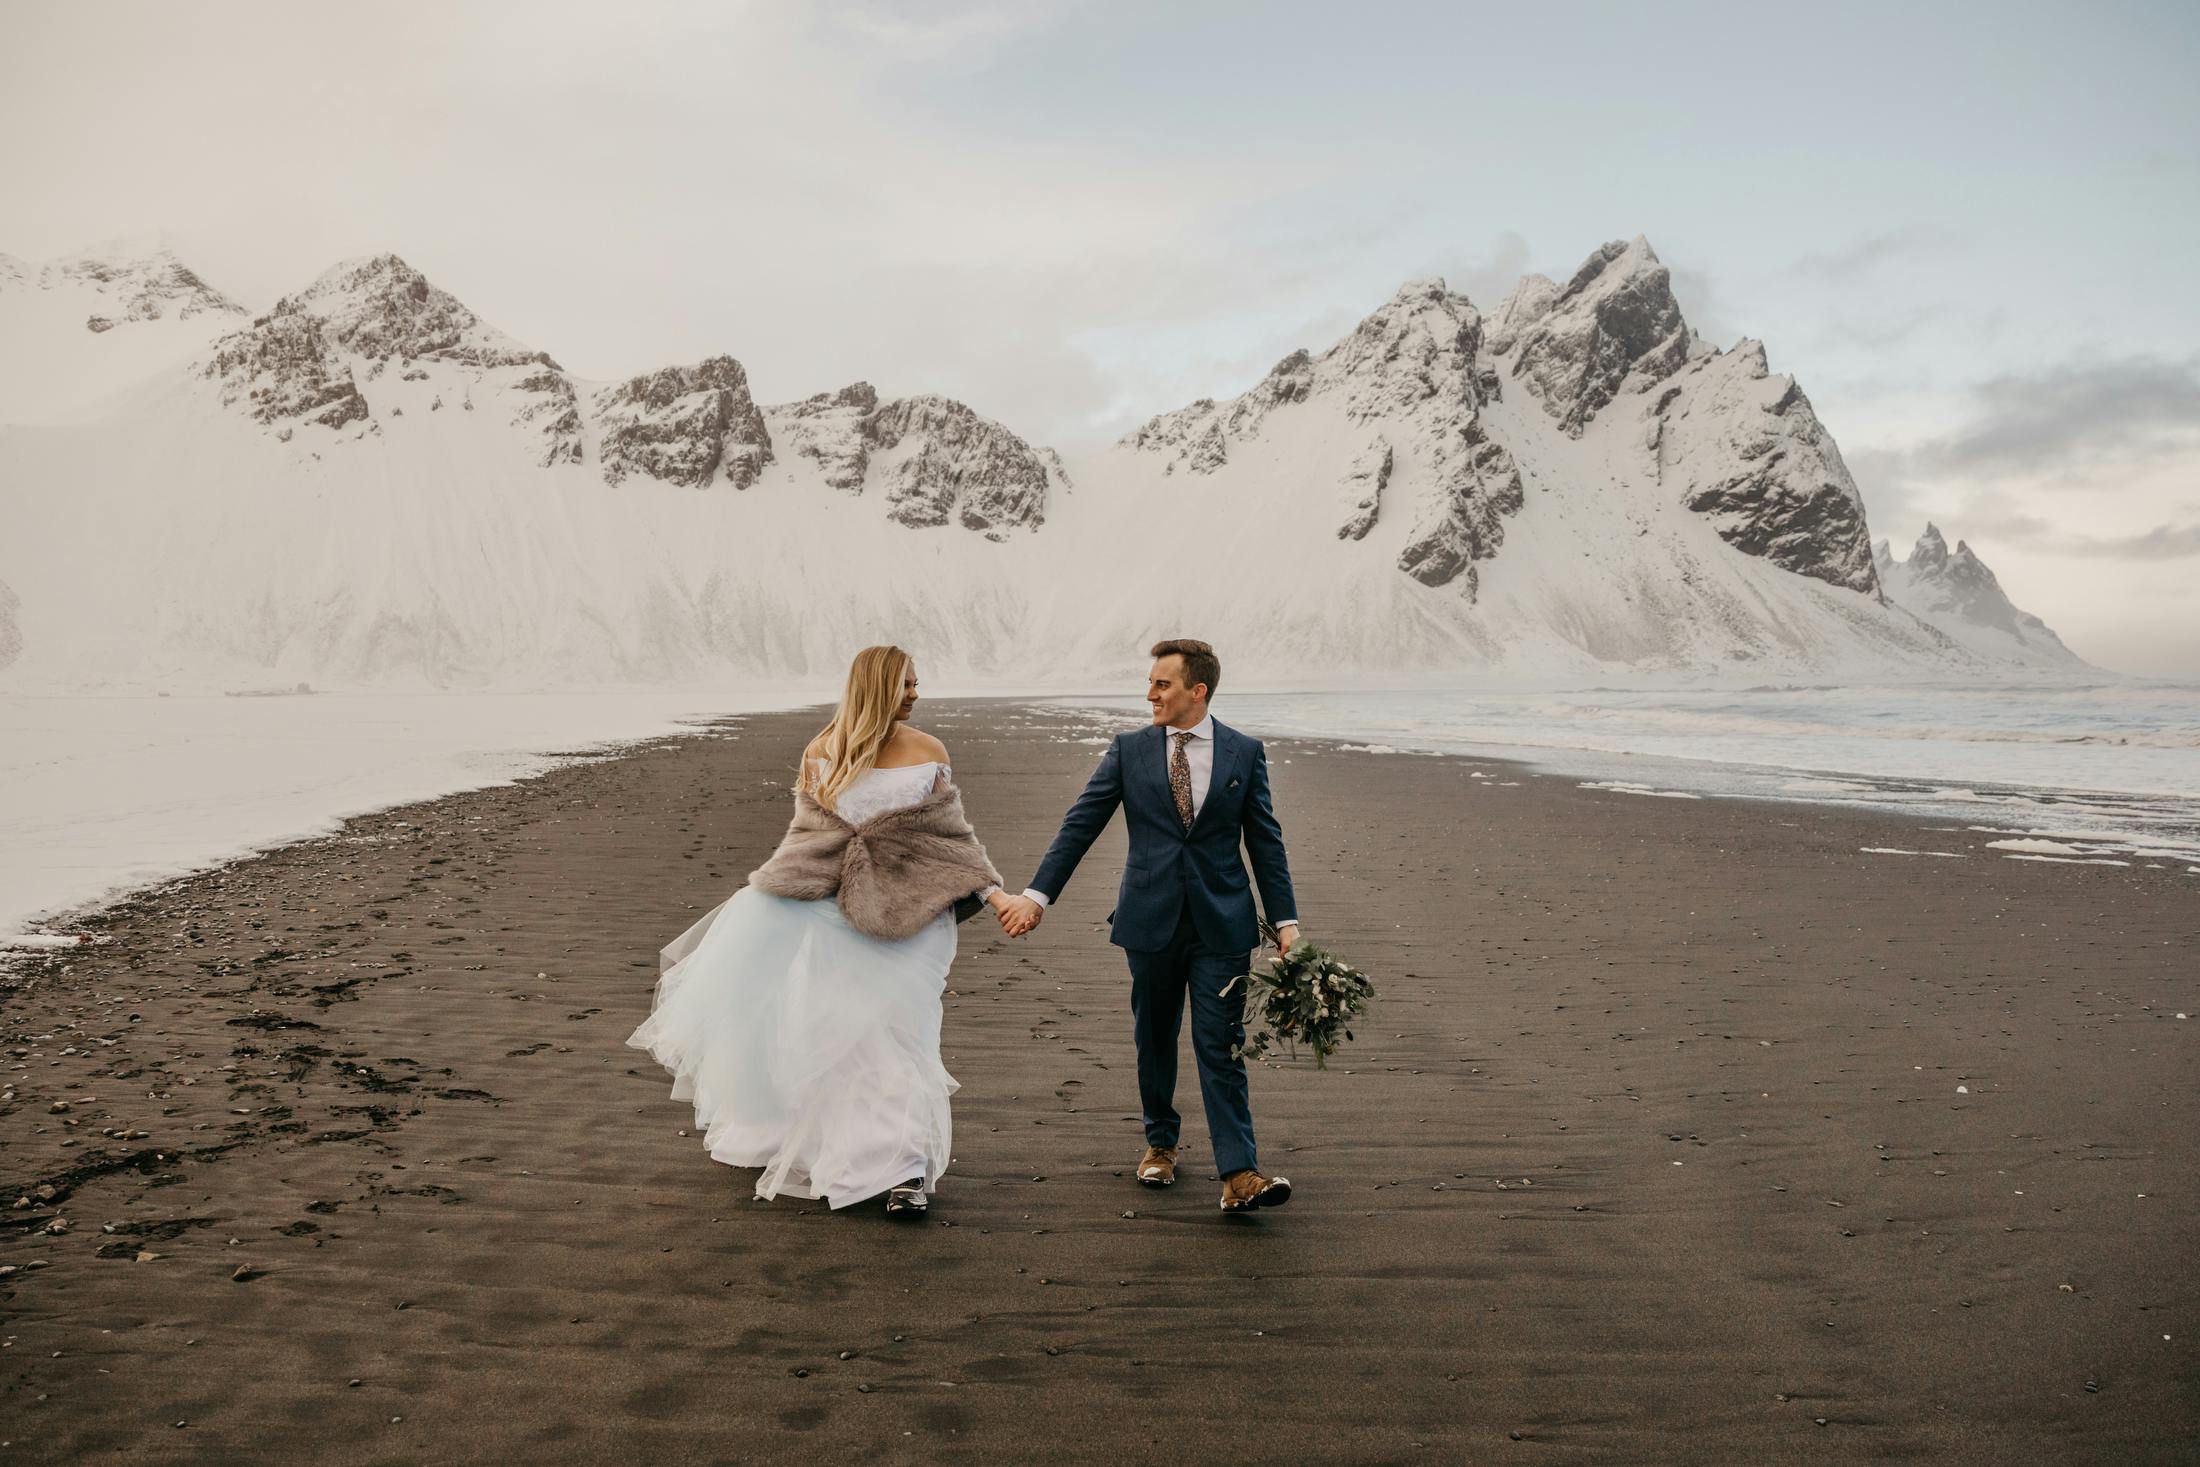 Bride and groom in a winter beach landscape at Vestrahorn mountain in Stokksnes, Iceland